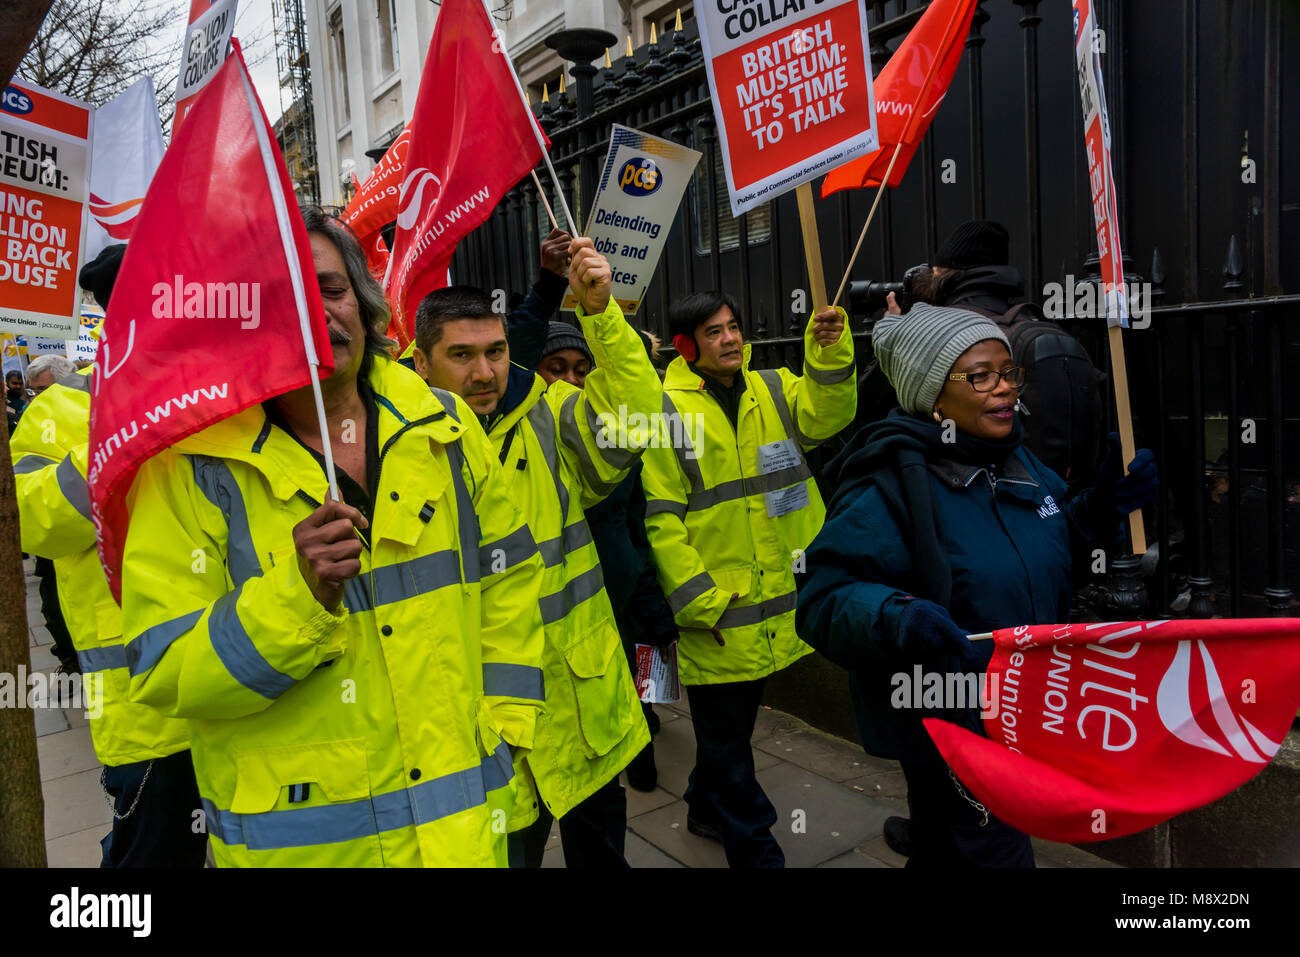 March 20, 2018 - London, UK. Workers formerly employed by Carrilion at the British Musem and now paid by the administrator march in the protest by staff at the British Museum whose jobs were privatised despite union oppositions and became Carillion employees and have been left in limbo after the collapse of the company. They demand that the British Museum talk with their unions, the PCSm and Unite, bring the staff back into direct employment and protect their jobs, pensions and terms and conditions. Speakers at the protest included PCS General Secretary Mark Serwotka, Clara Paillard, President Stock Photo